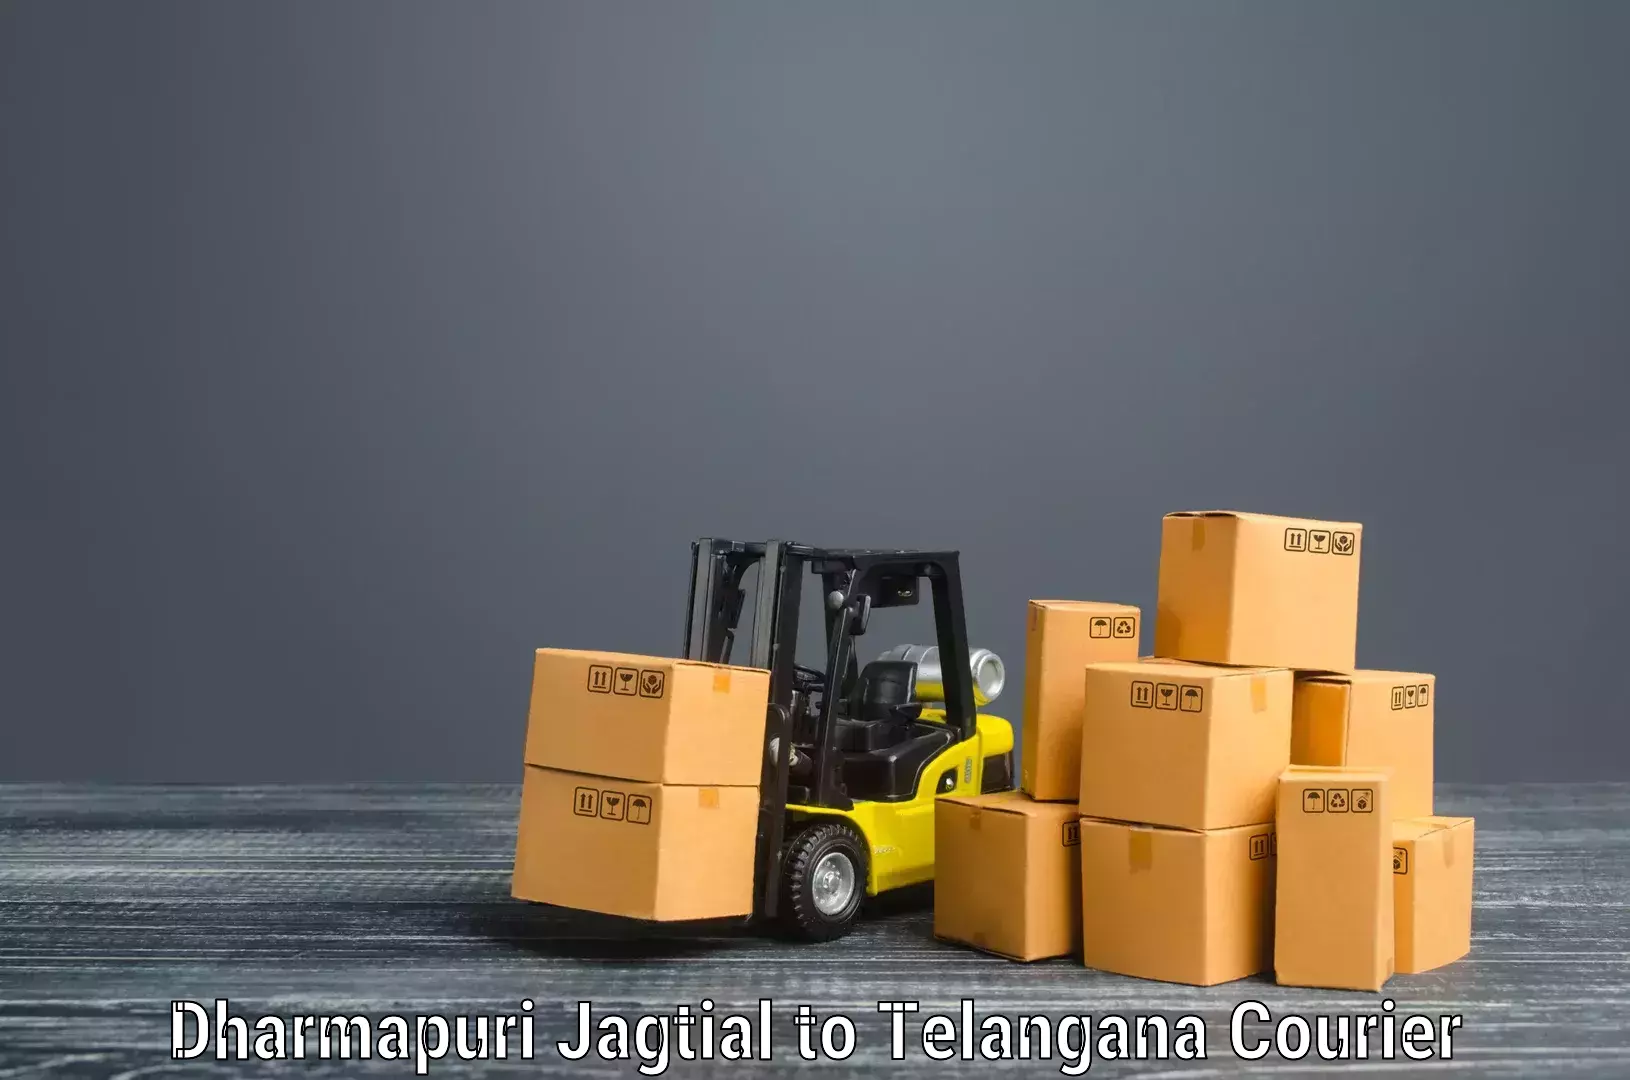 Efficient packing and moving Dharmapuri Jagtial to Jogipet